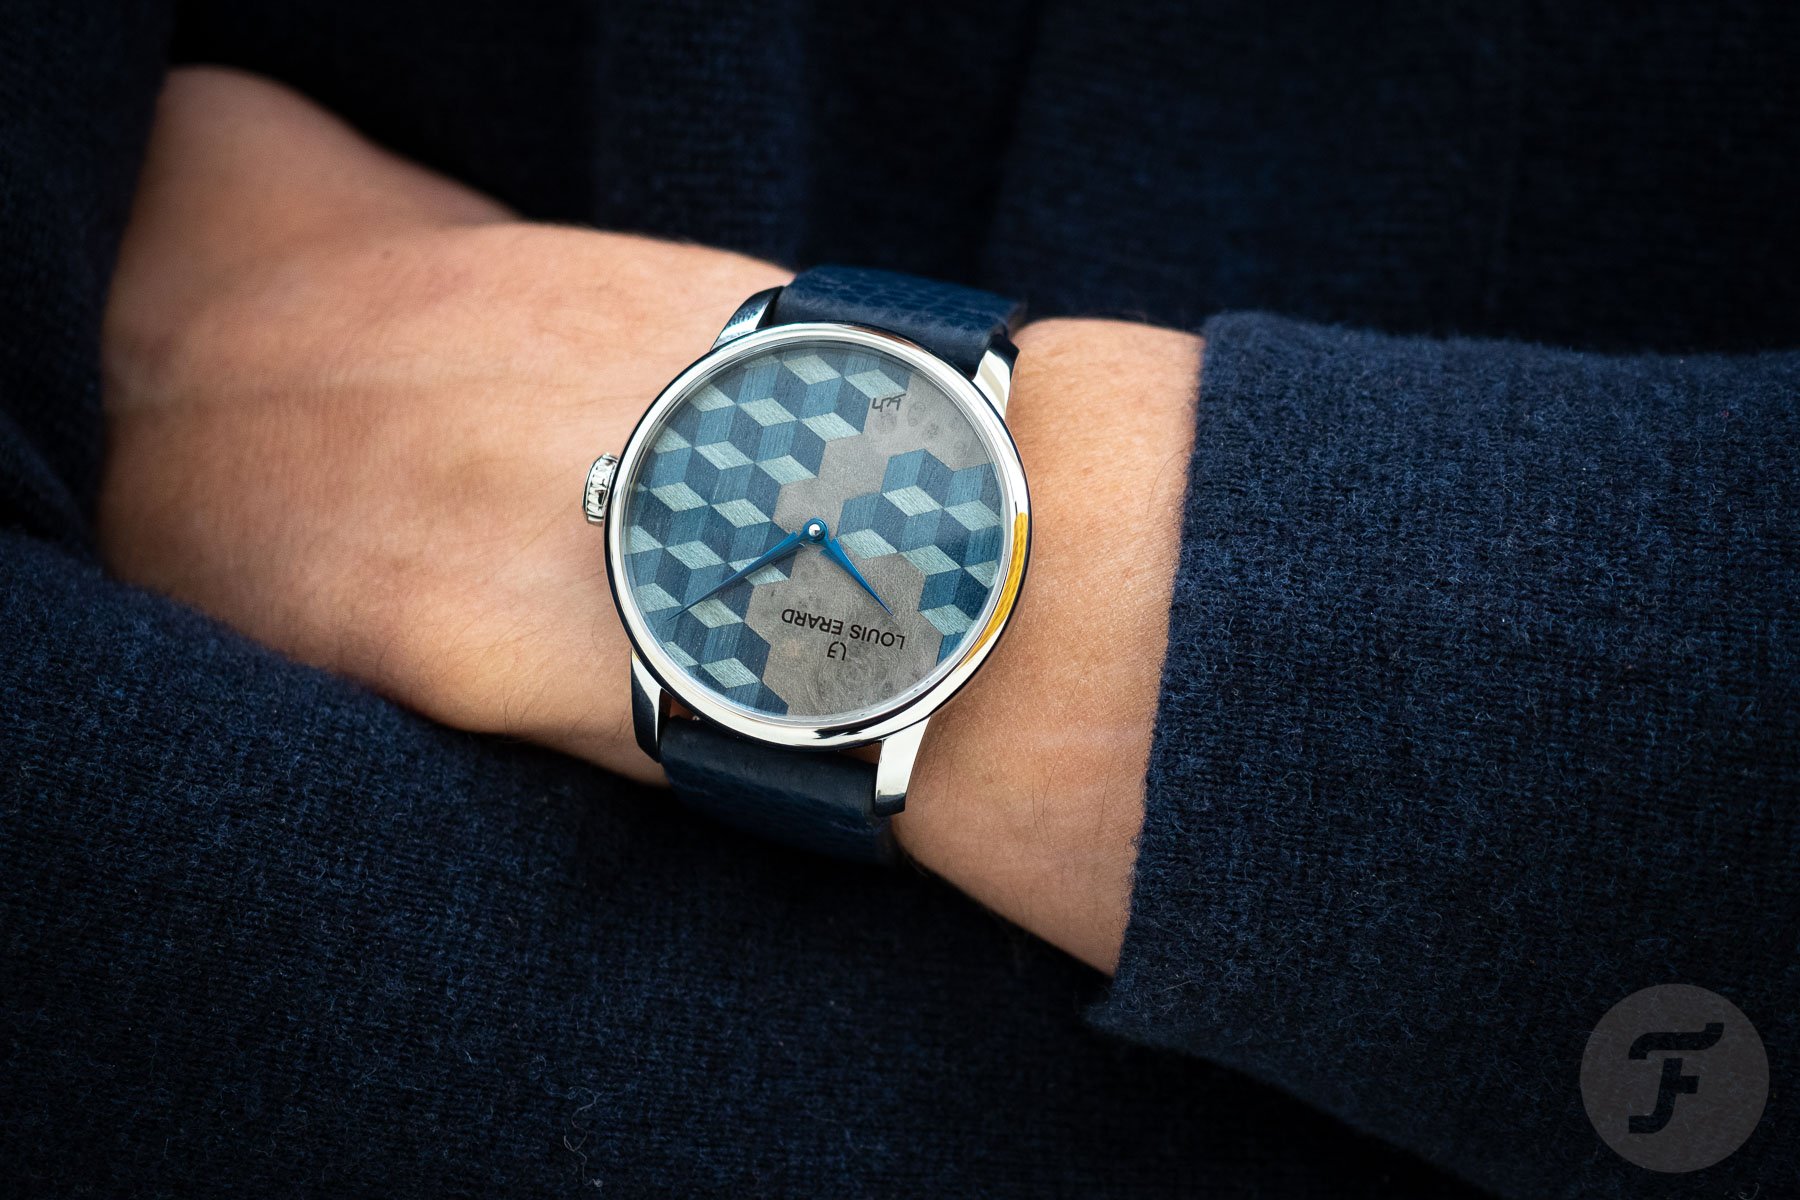 Excellence Marqueterie 42mm Limited Edition